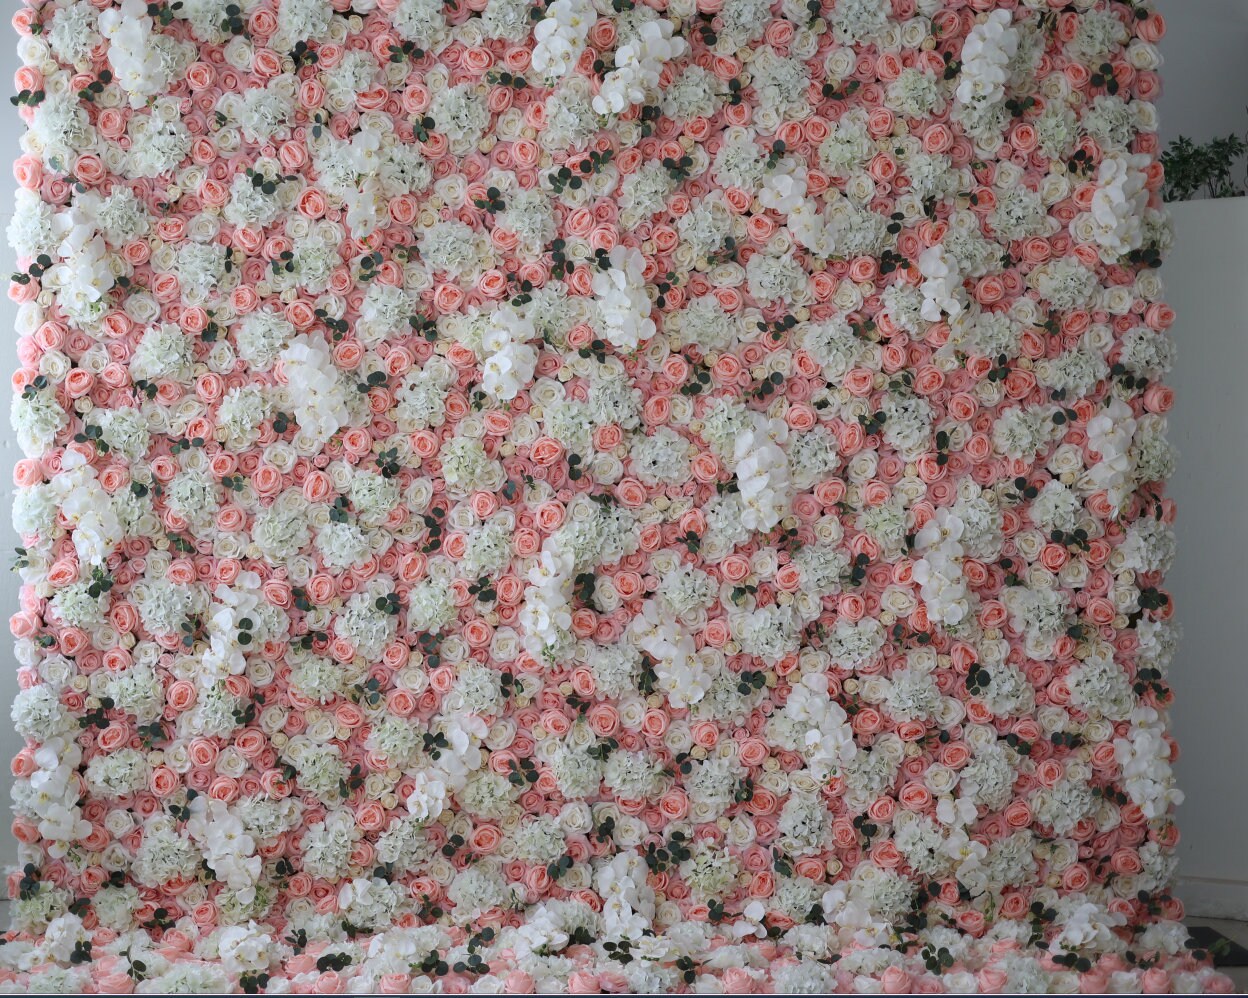 New Design Floral Wall For Wedding Photography Backdrop Special Event Salon Party Arrangement Fabric Rolling Up Curtain Fabric Cloth